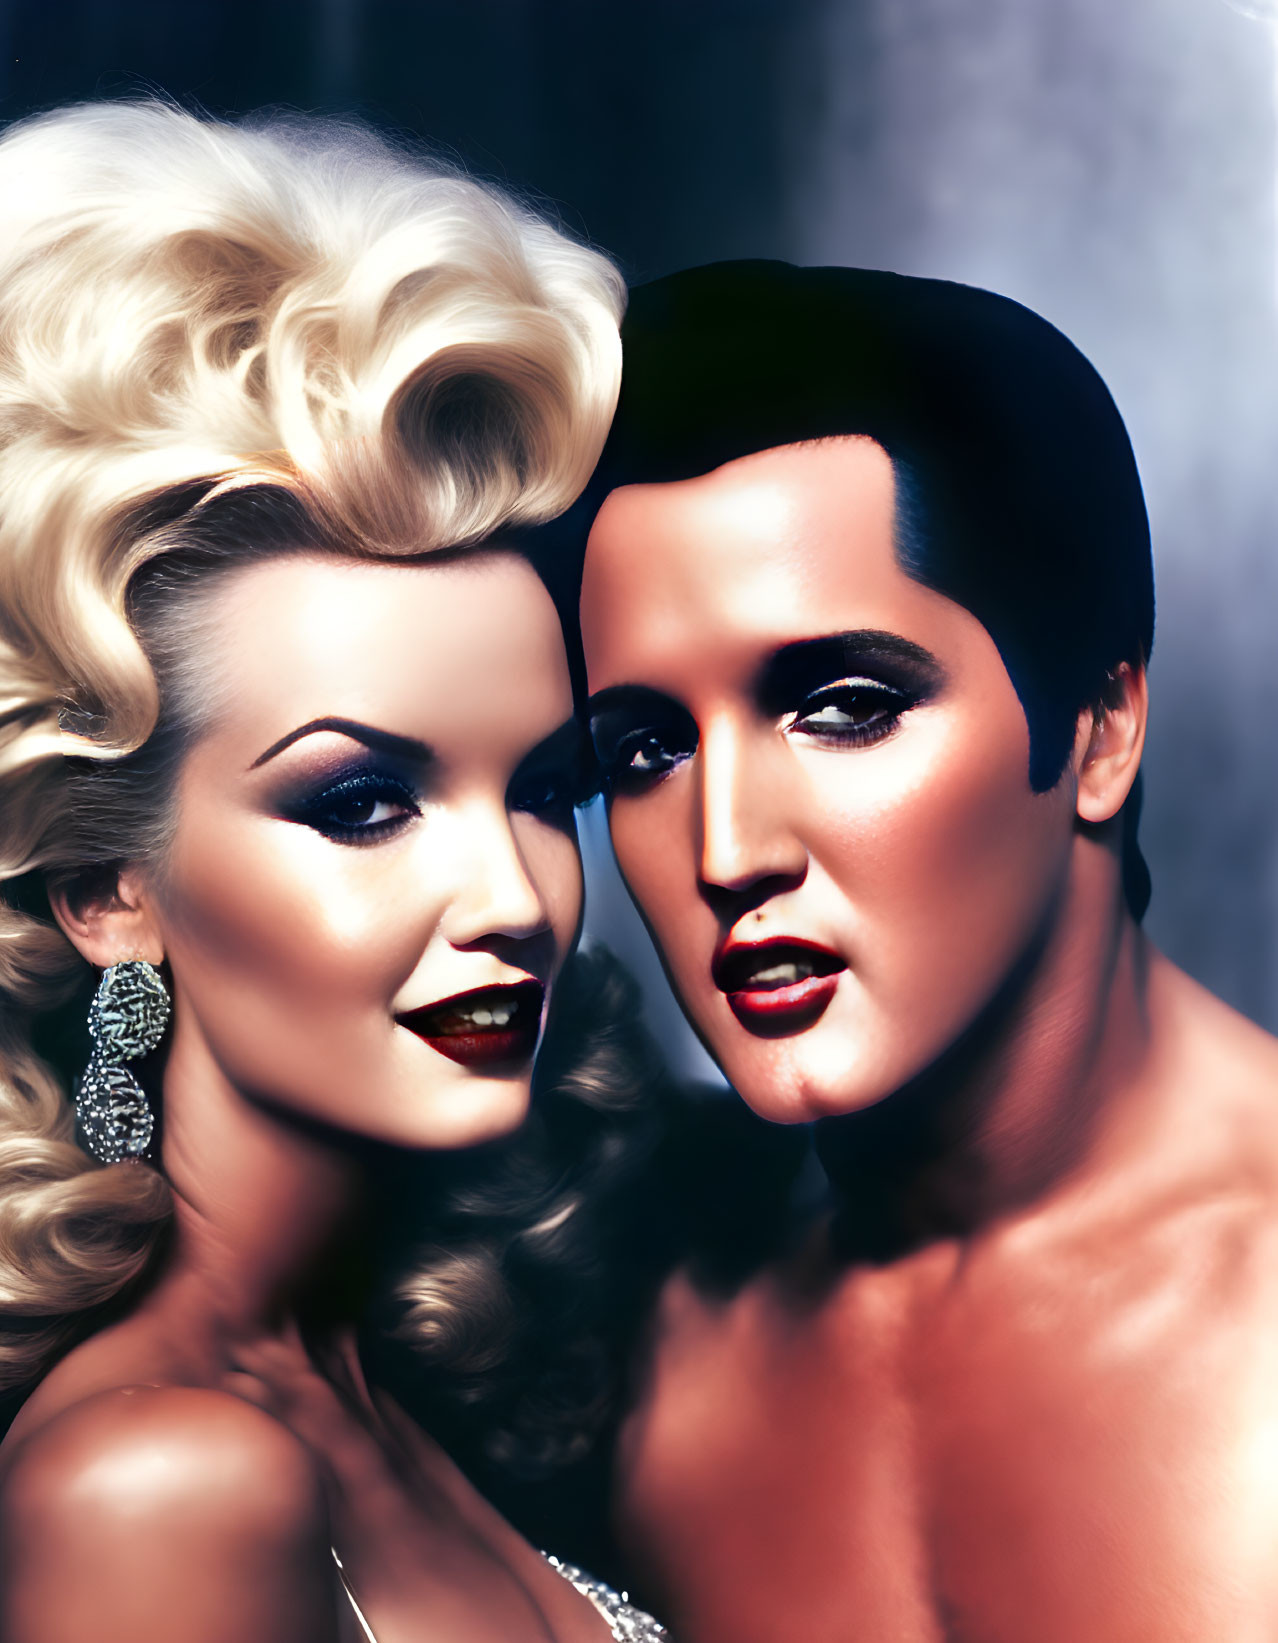 Vintage-style portrait of glamorous woman and Elvis Presley lookalike with classic Hollywood aesthetic